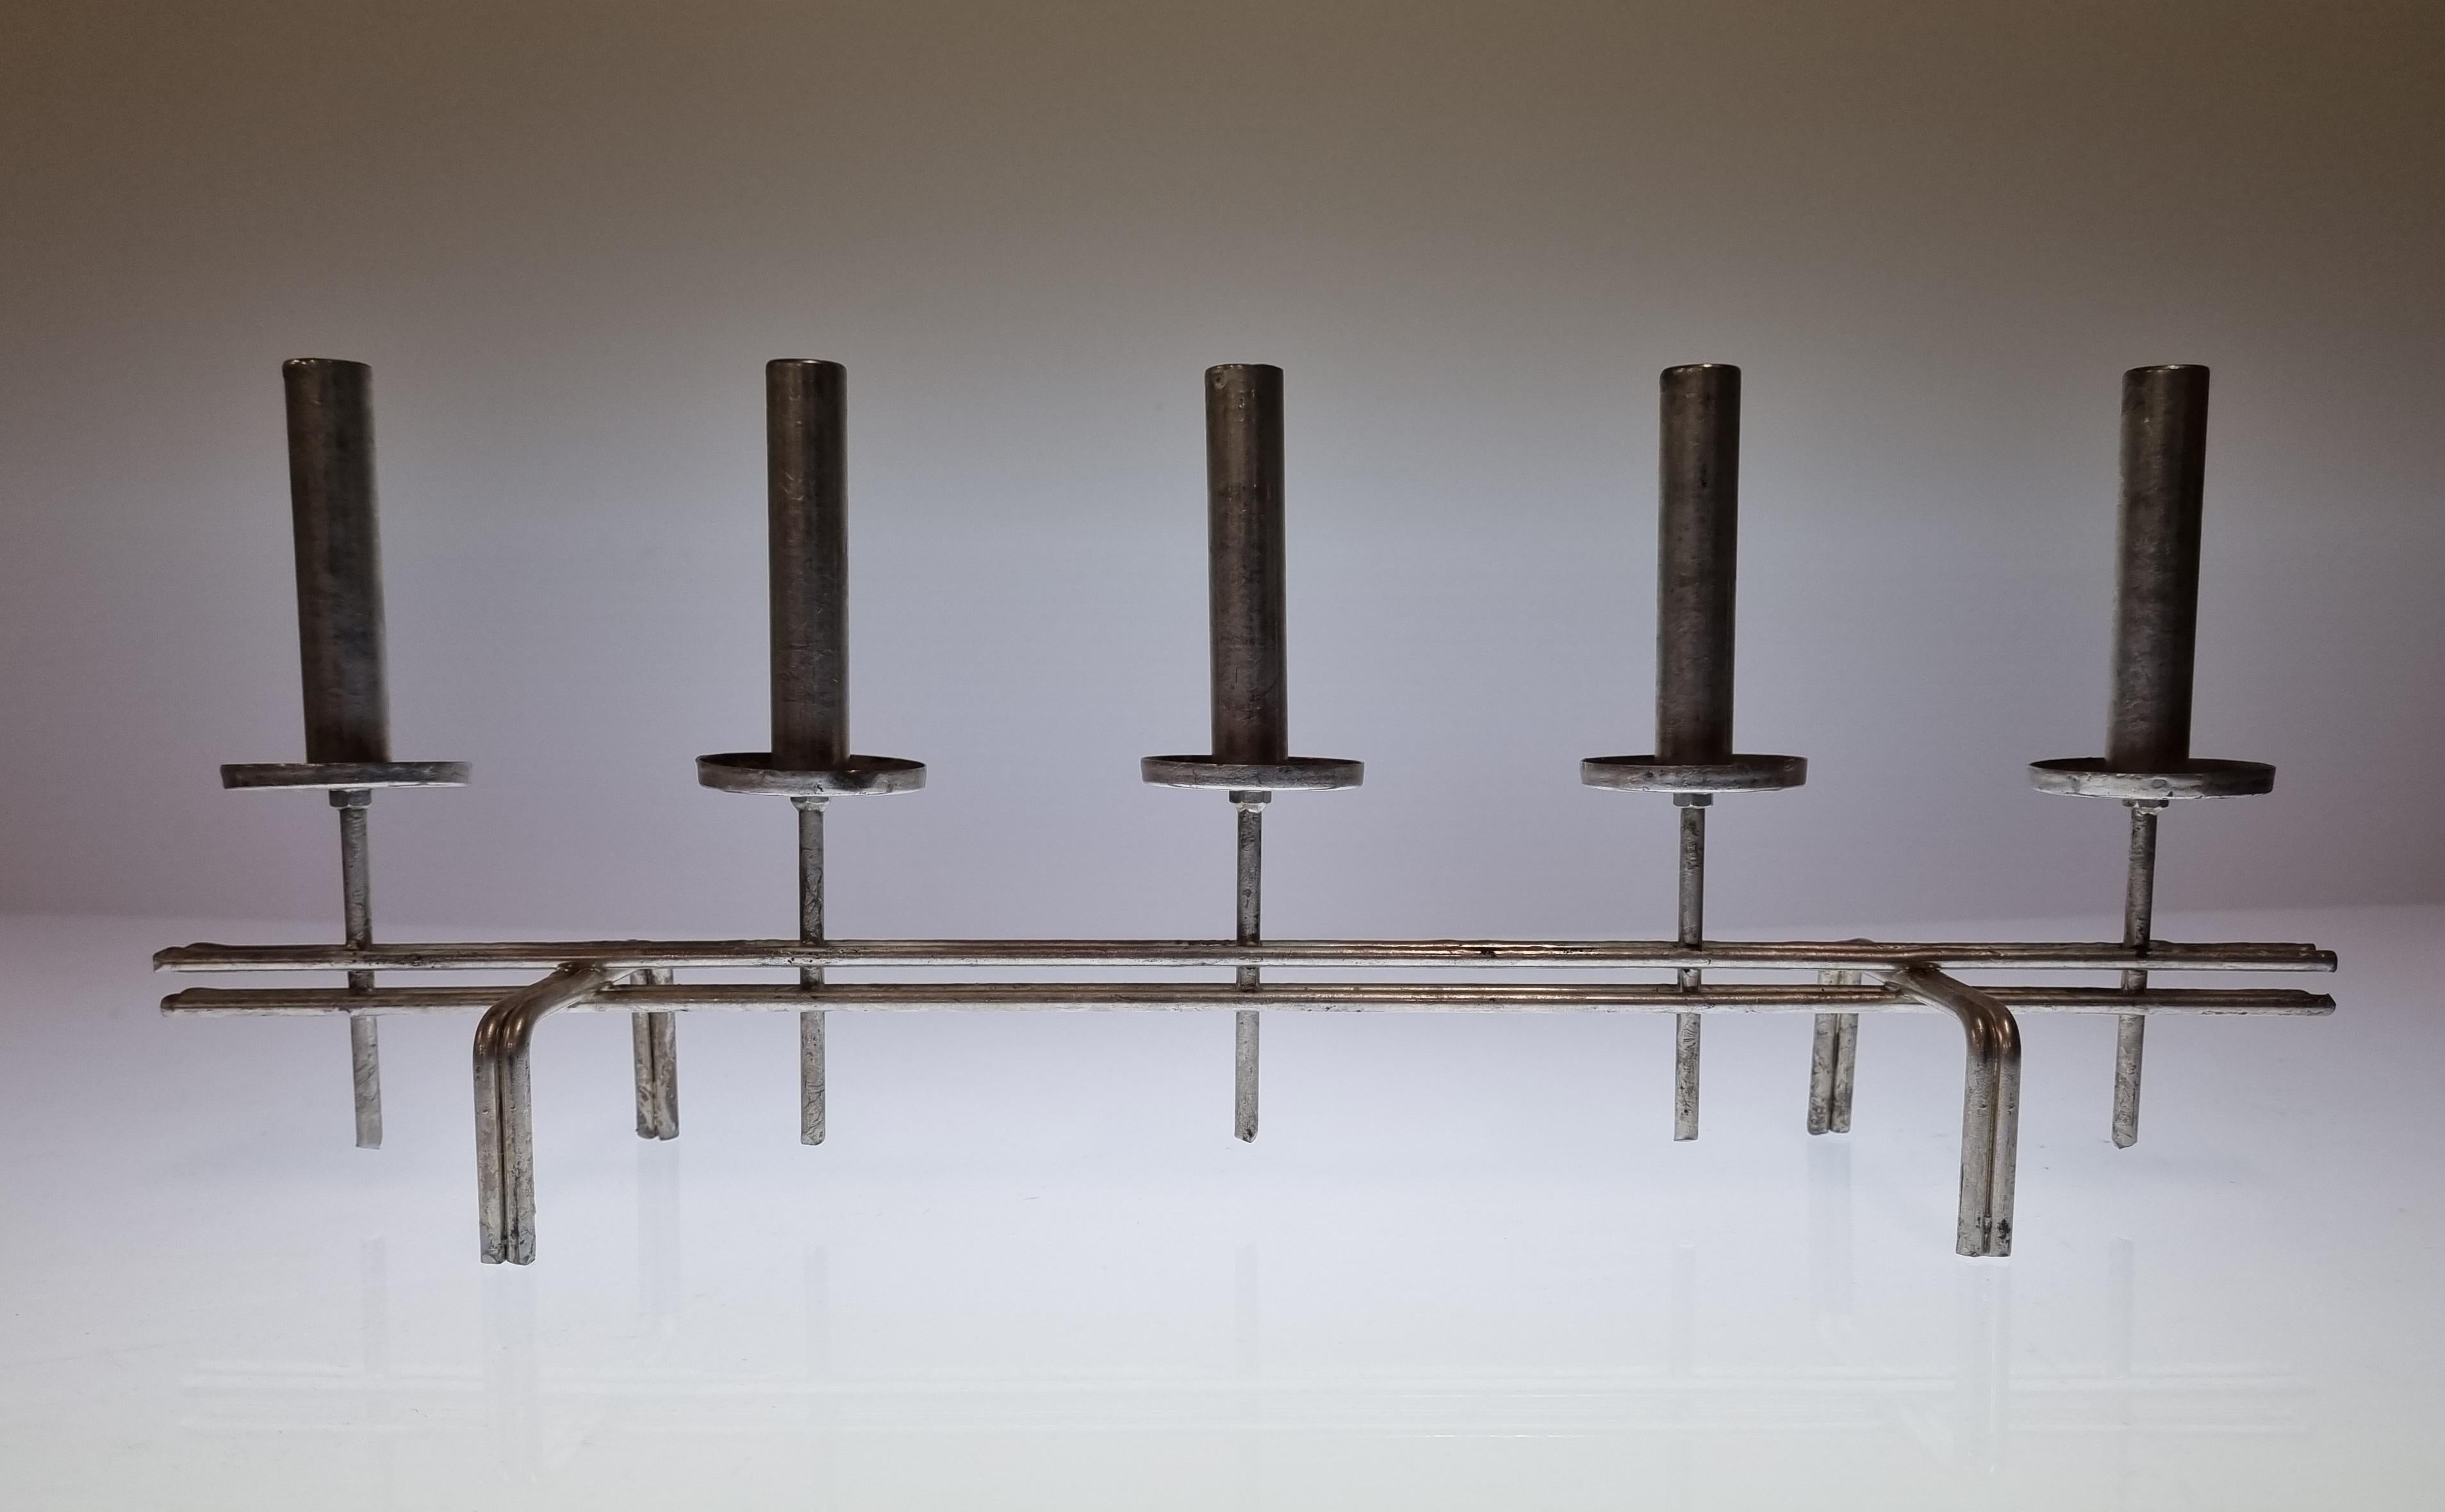 In addition to his iconic brass lamps, Paavo Tynell (1890-1973) designed candle holders and othe metal items. This candle holder is such an example and was handmade late in his career by Paavo Tynell himself. After retiring from making lamps, Tynell